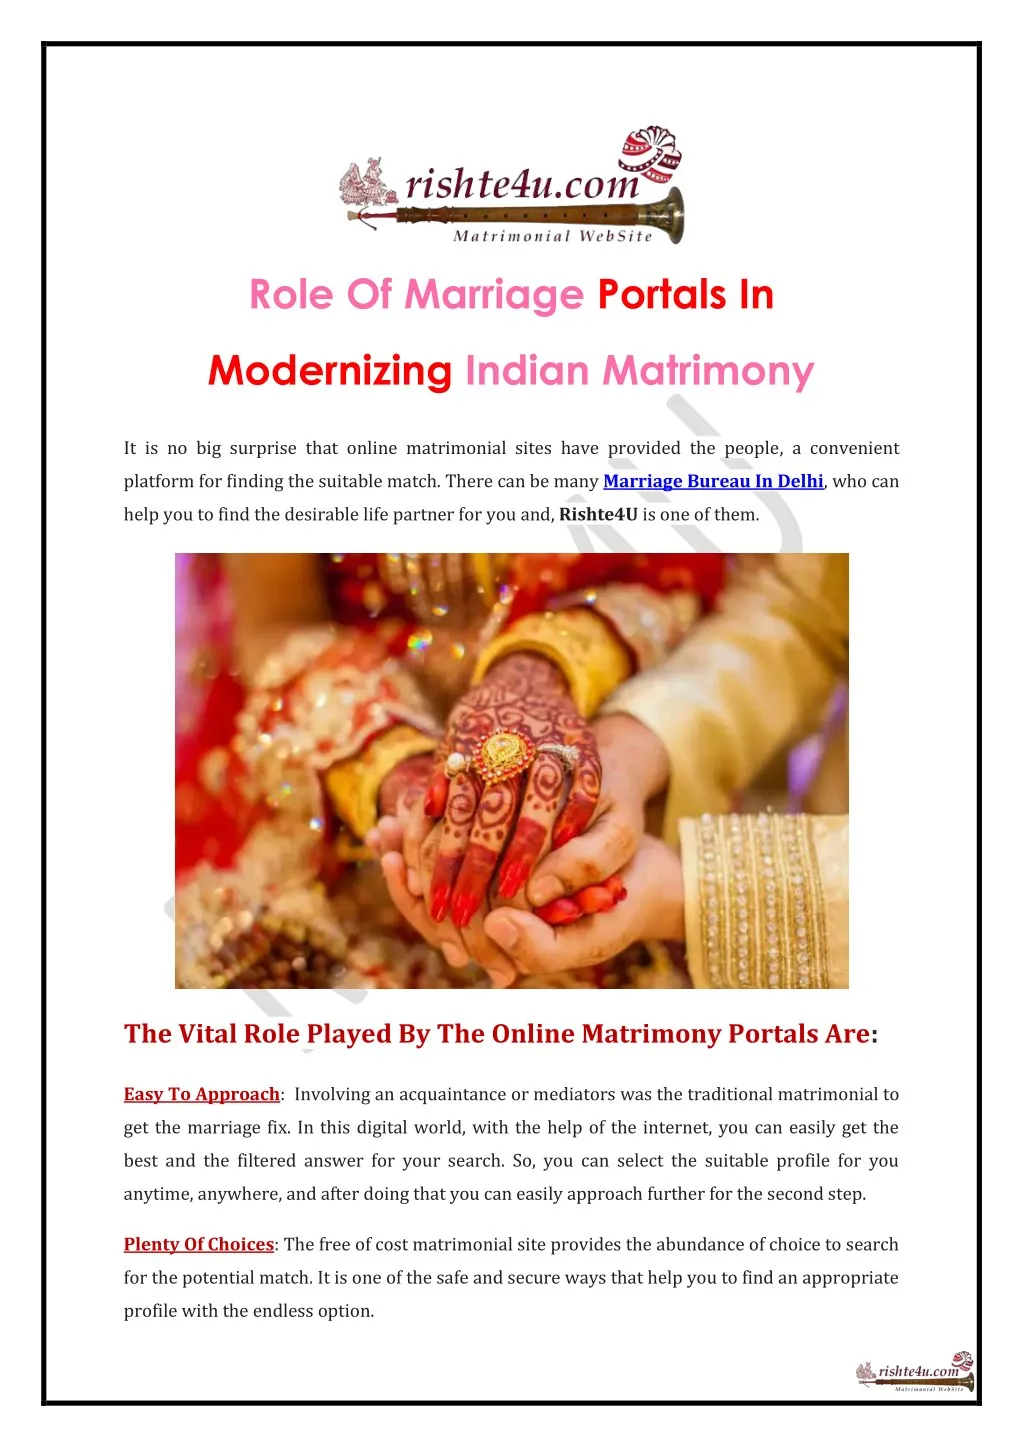 role of marriage portals in